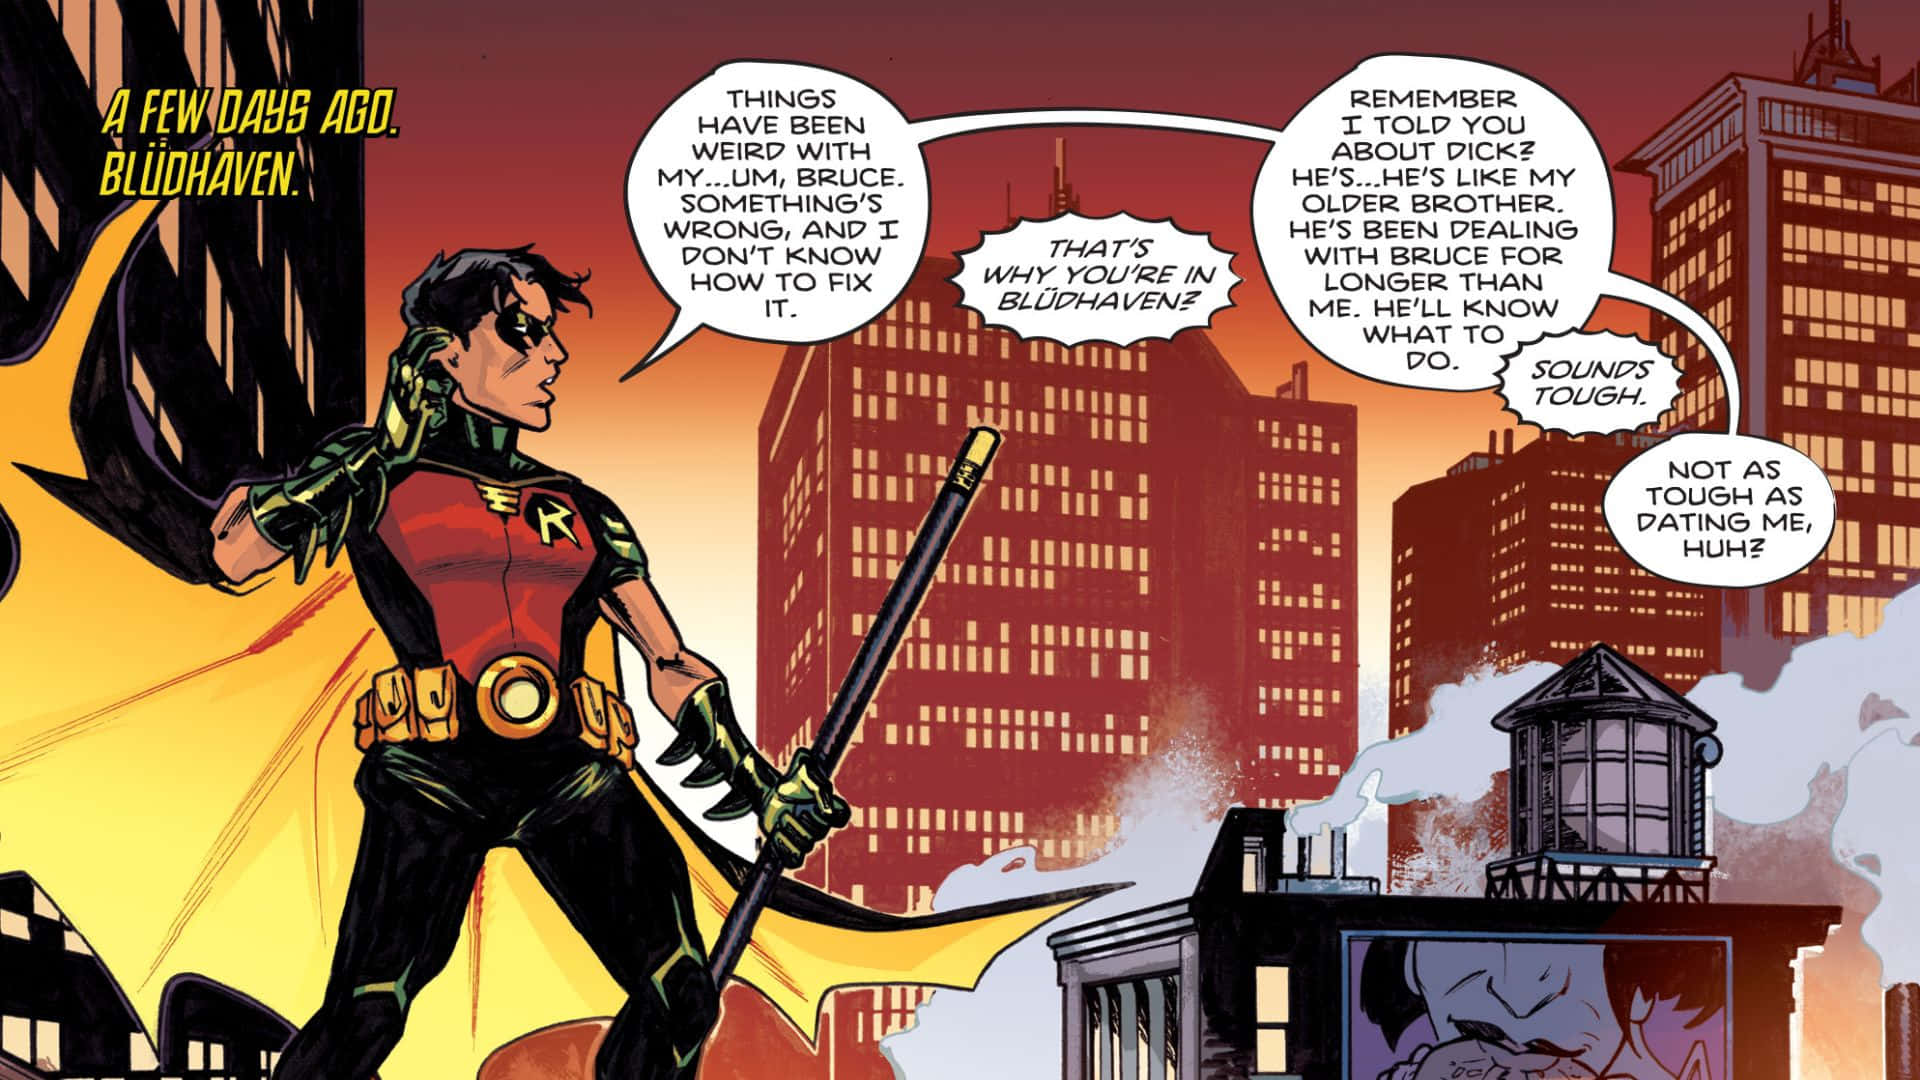 Tim Drake in Action - The Master Detective in the DC Universe Wallpaper